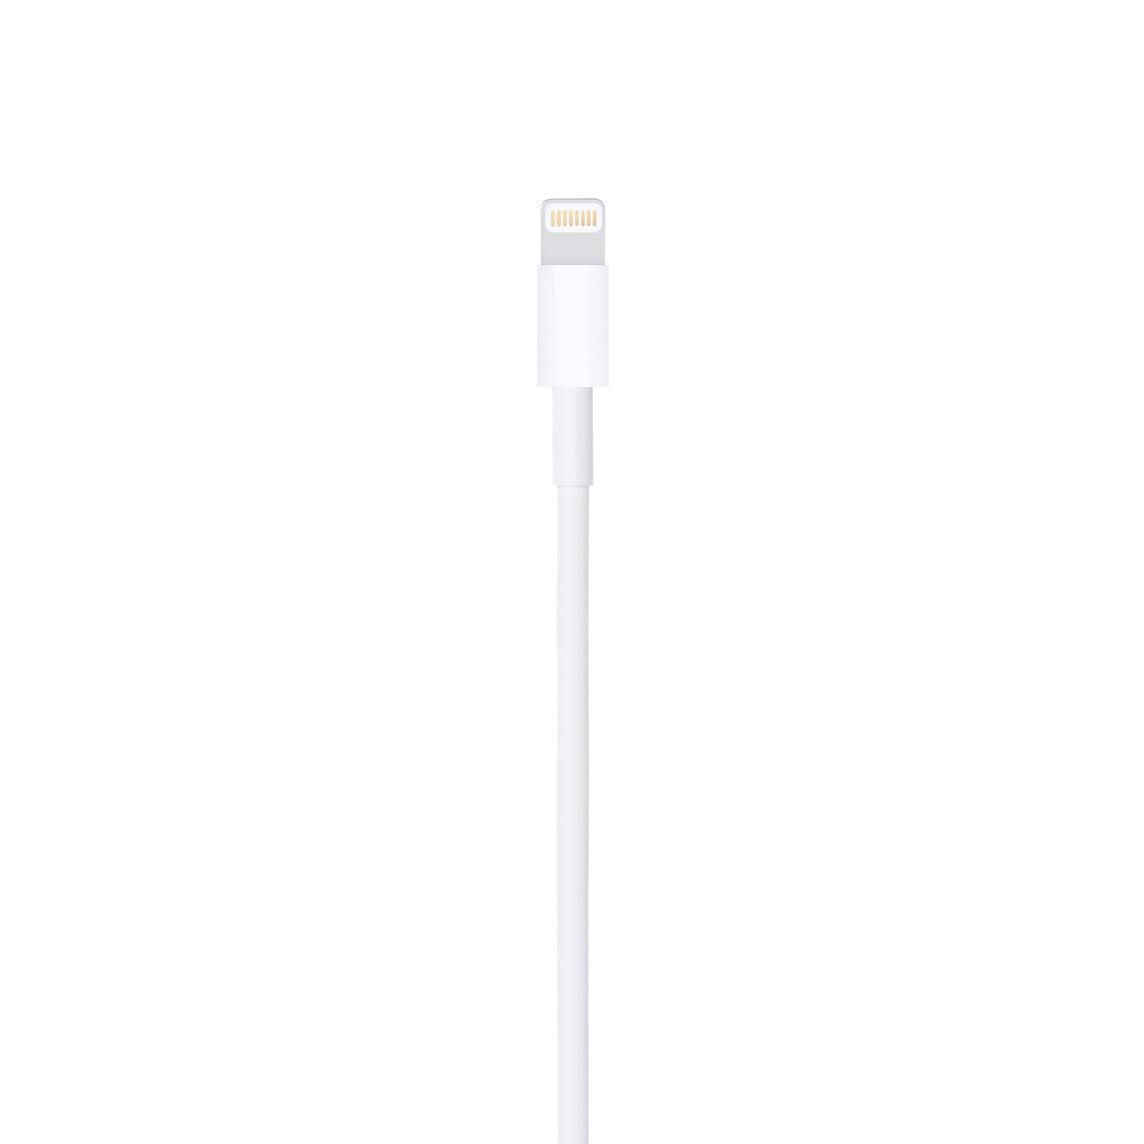 Lightning to USB Cable (1m) Apple Original - Grab Your Gadget